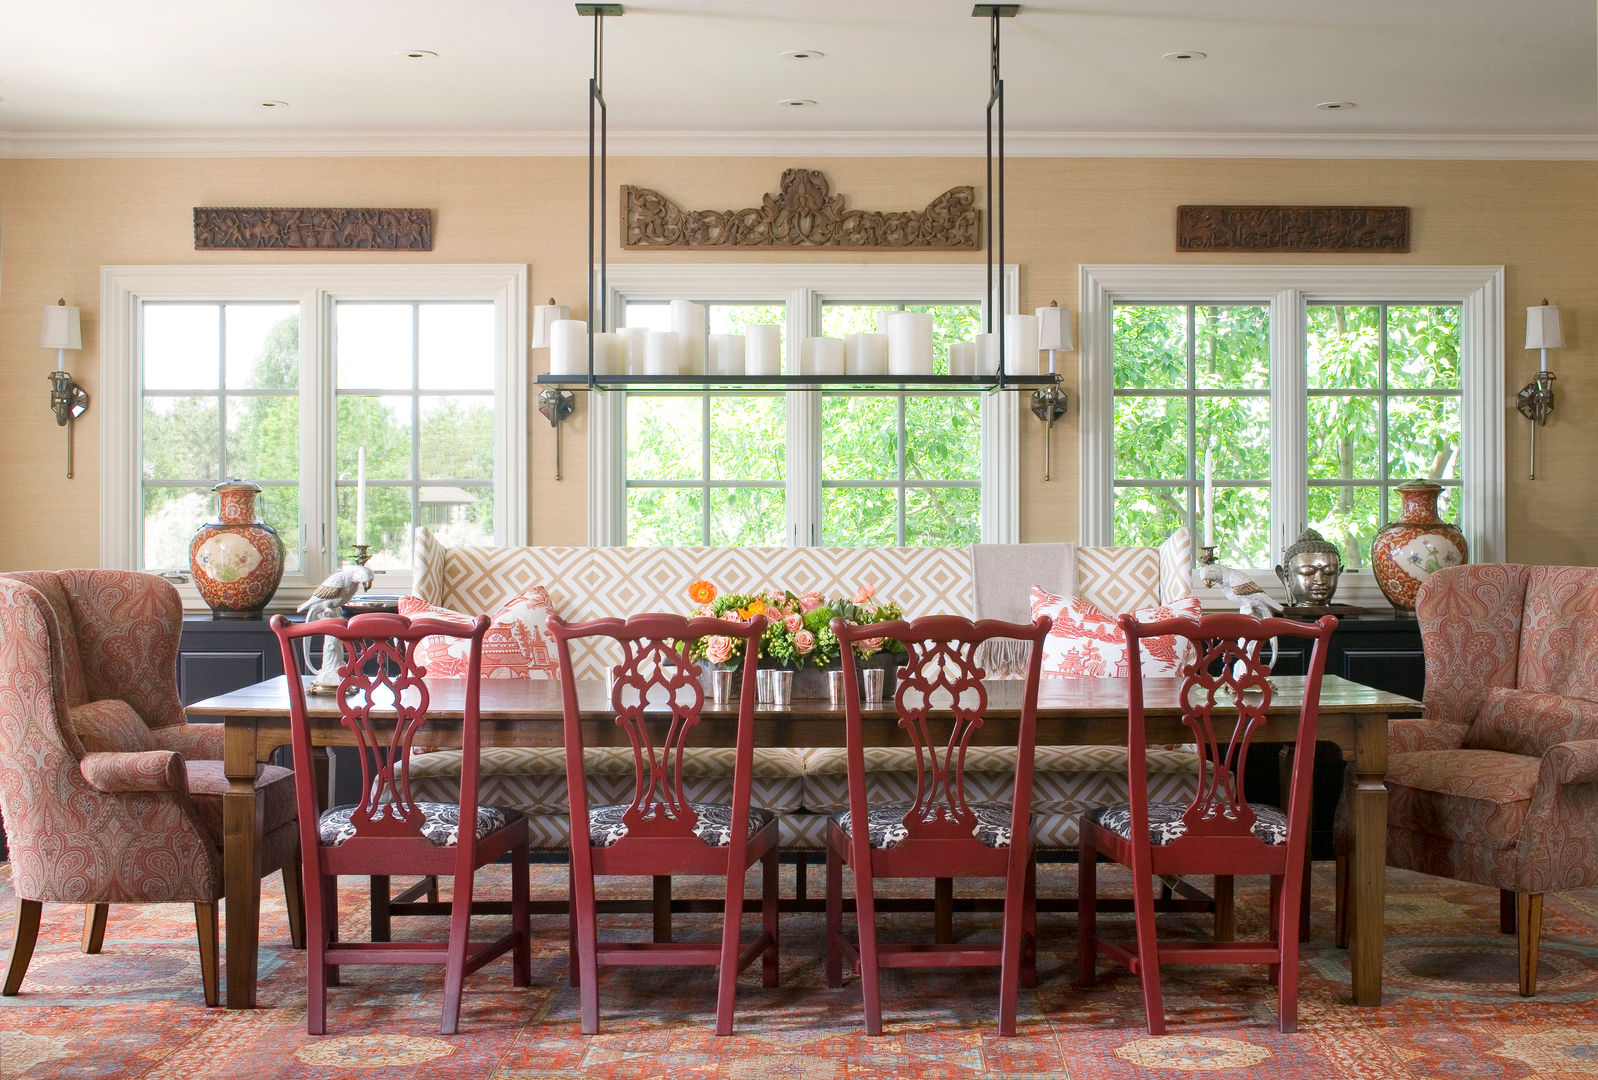 Home of the Year, Andrea Schumacher Interiors Andrea Schumacher Interiors 클래식스타일 다이닝 룸